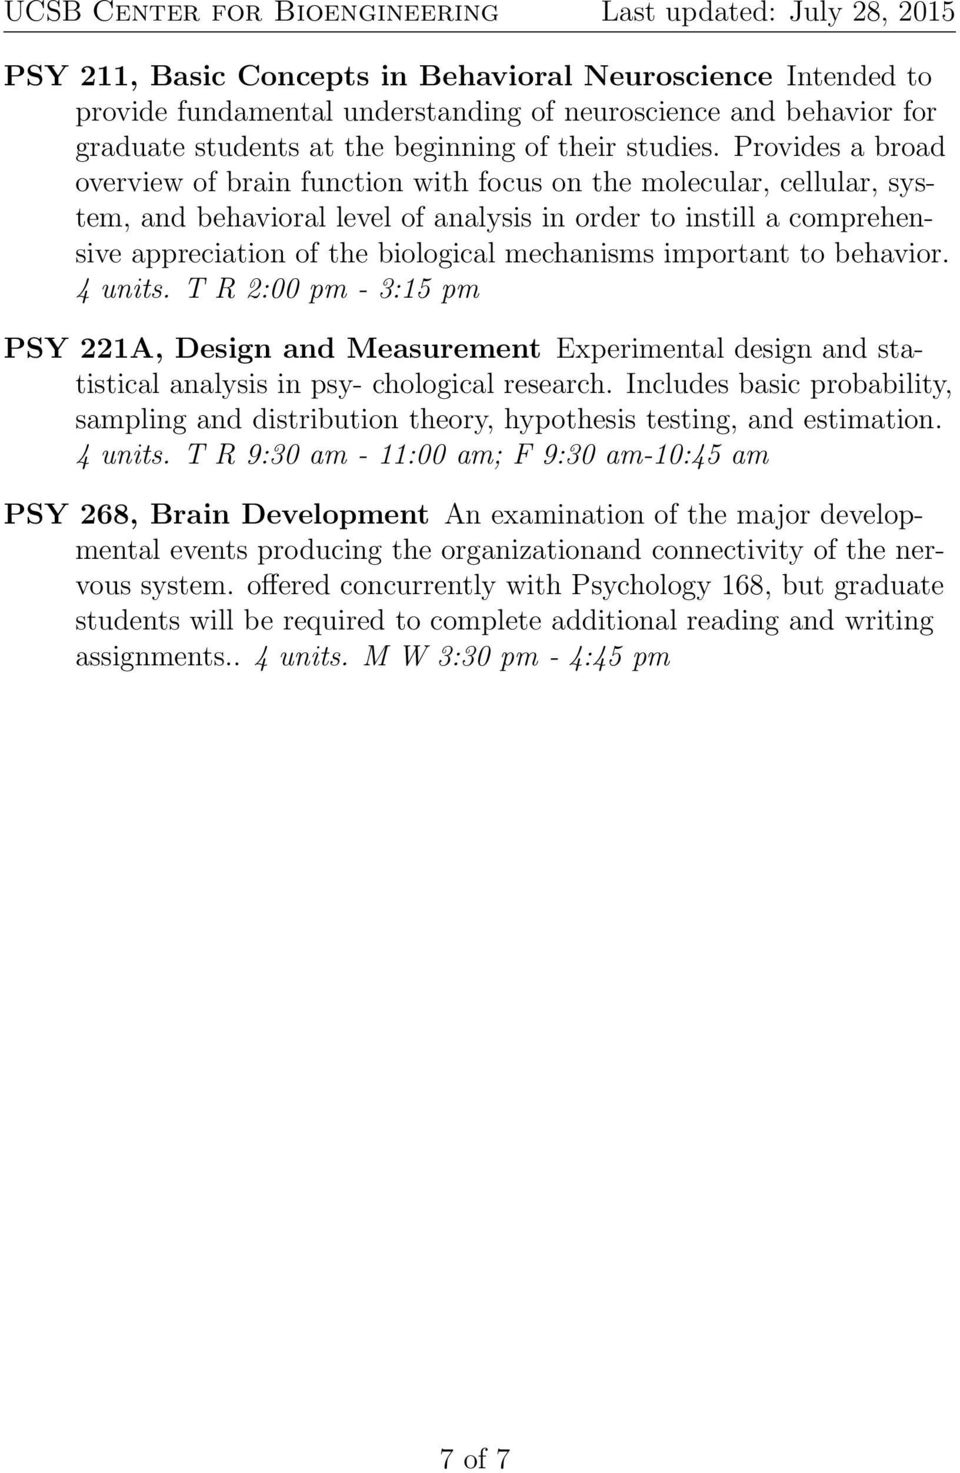 mechanisms important to behavior. 4 units. T R 2:00 pm - 3:15 pm PSY 221A, Design and Measurement Experimental design and statistical analysis in psy- chological research.